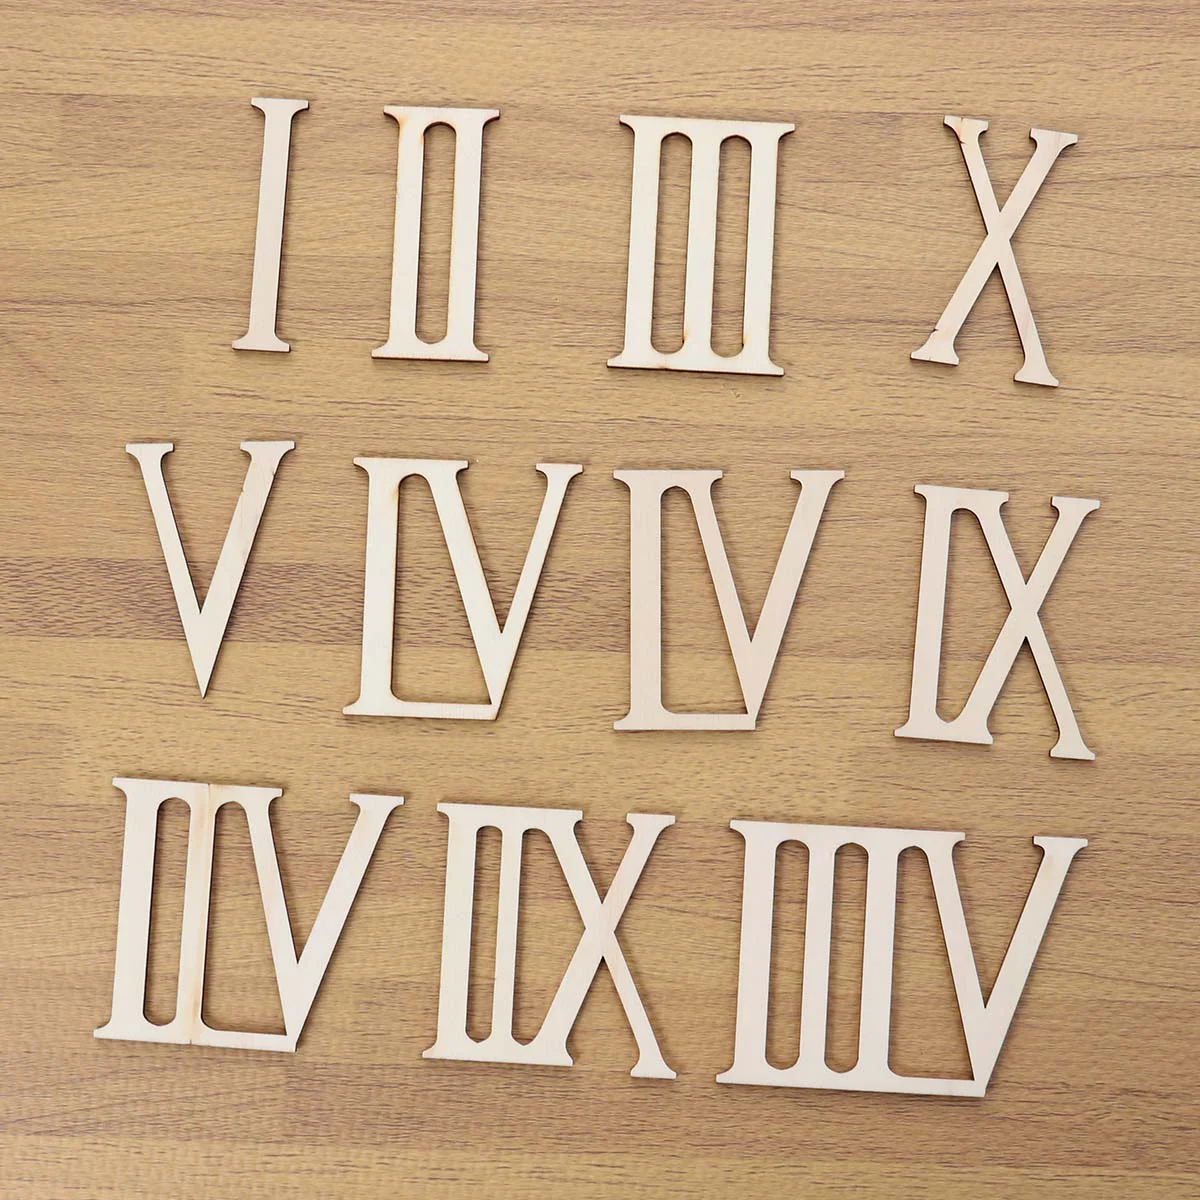 

12 Pcs Home Accessories Craft Wood Embellishment Homemade Ornaments Clock Numbers Home Décor Metal Numbers Scrapbook